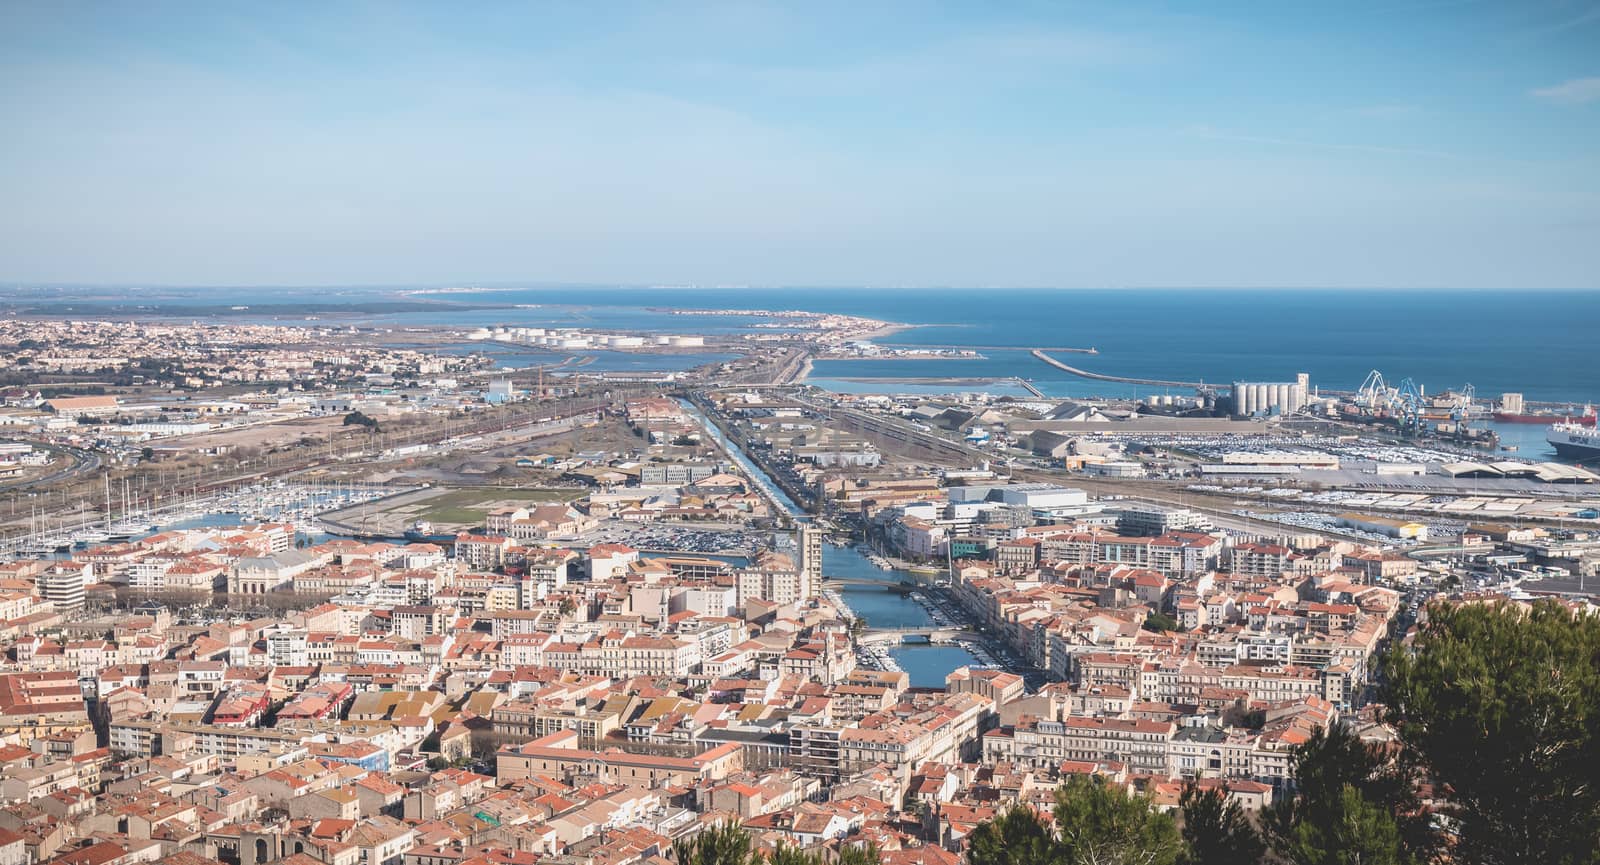 Sete, France - January 4, 2019: Aerial view of historic city center and harbor a winter day